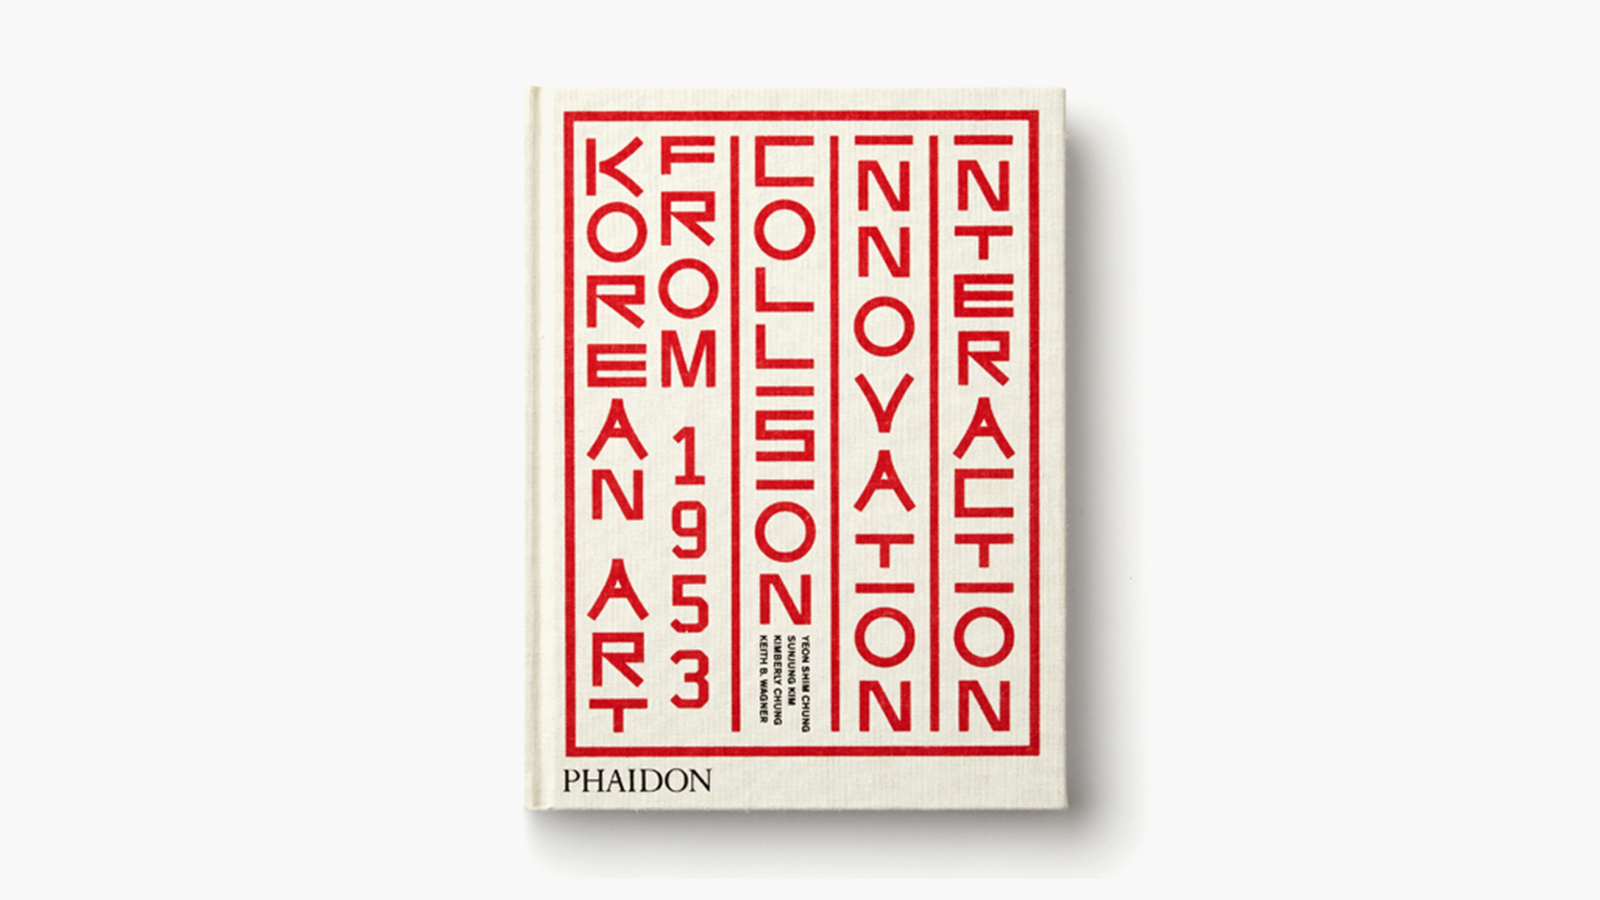 'Korean Art from 1953: Collision, Innovation, Interaction' by Yeon Shim Chung, Sunjung Kim, Kimberly Chung & Keith B. Wagner